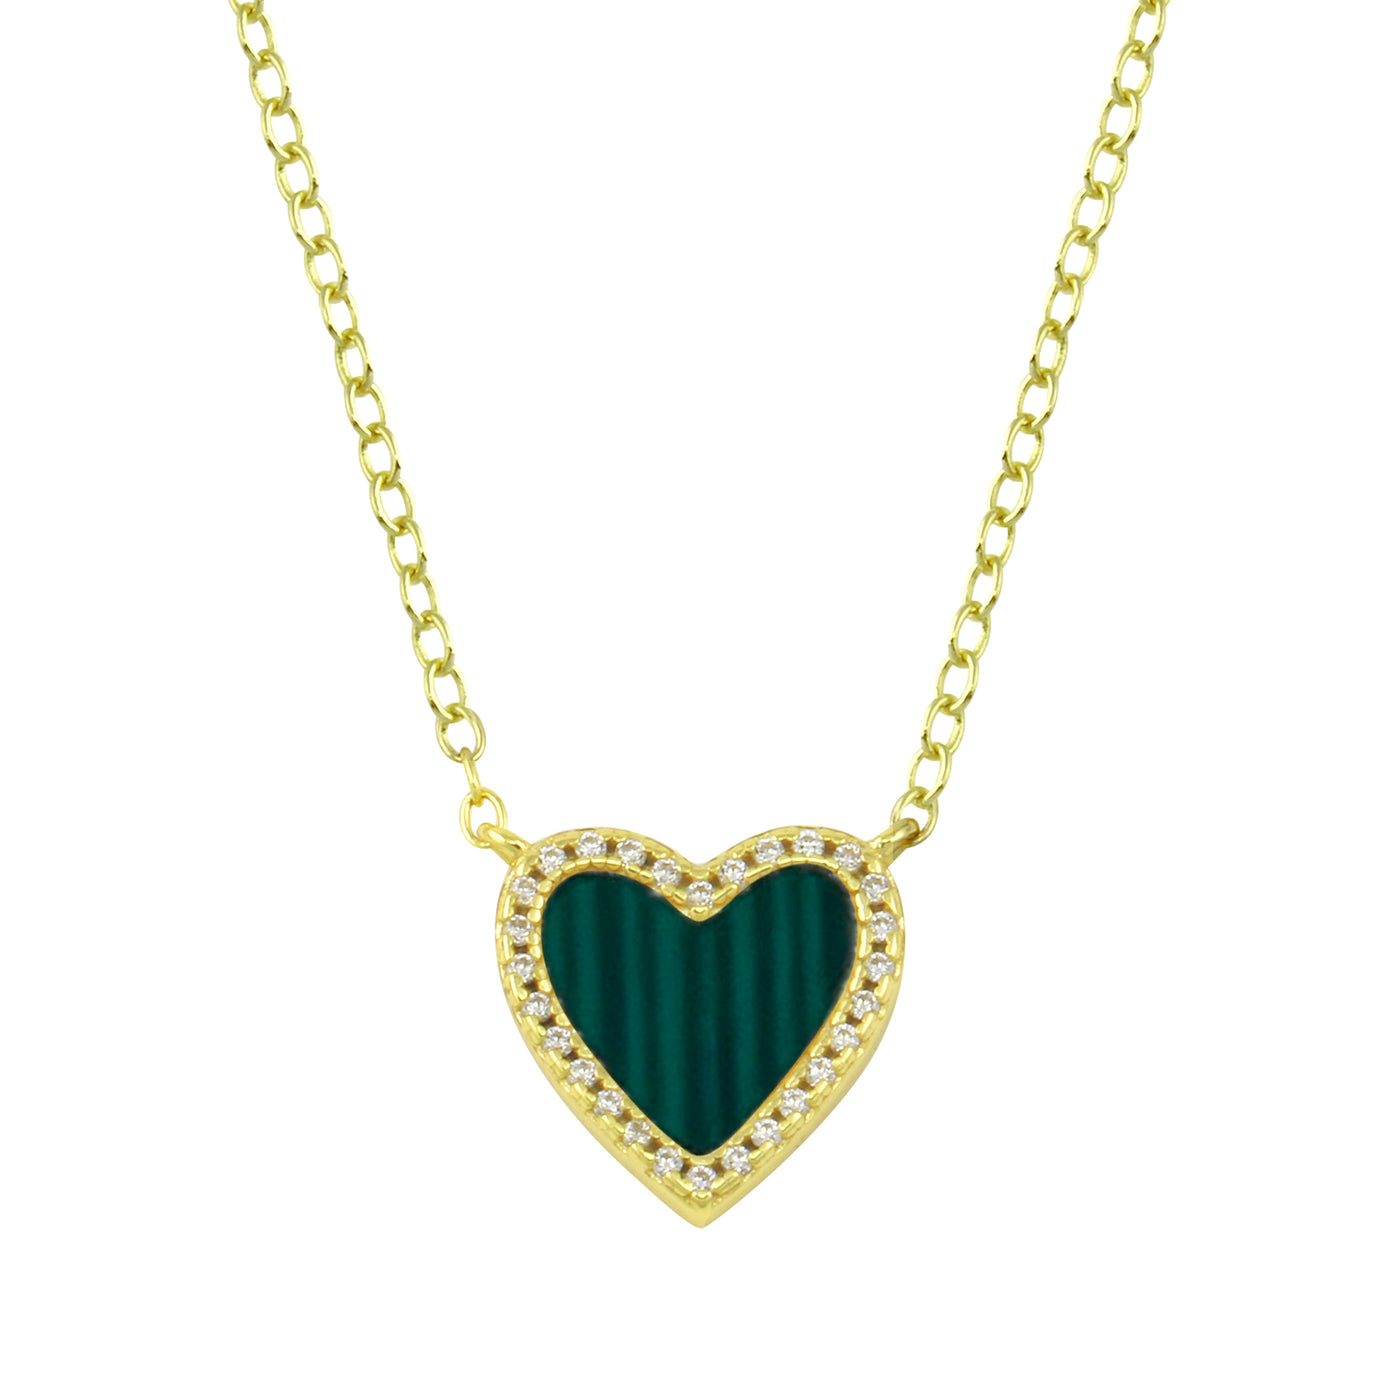 Small Pave Outline Stone Heart Necklace